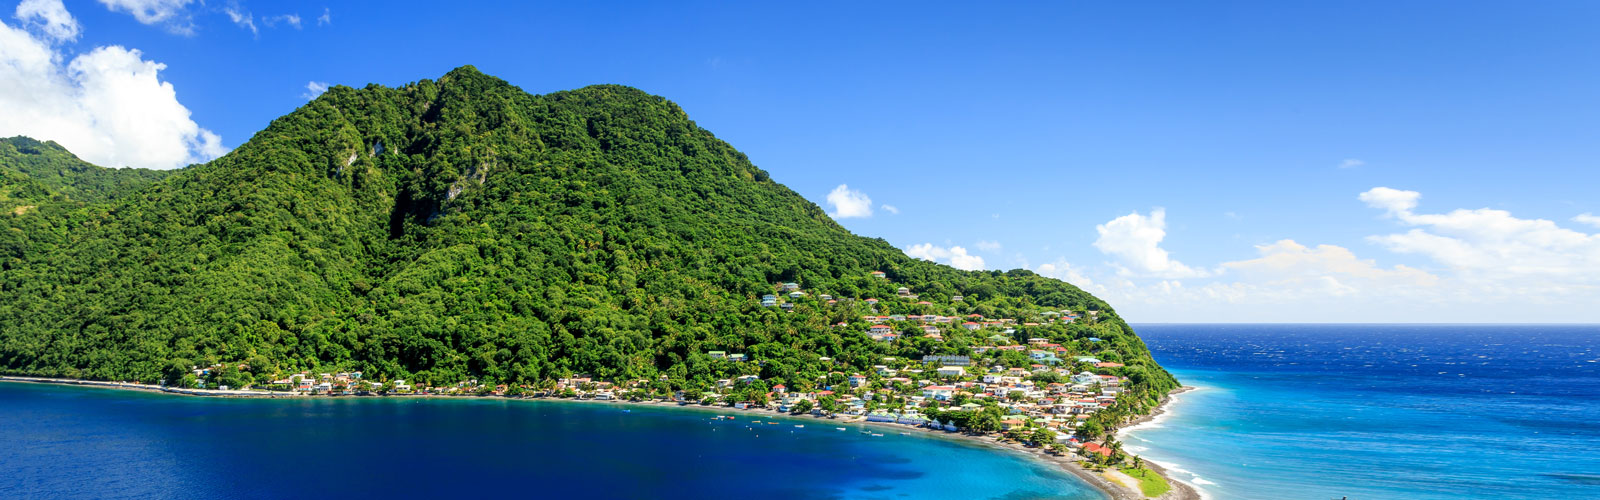 Dominica passport and citizenship in 2022: Changes for the better